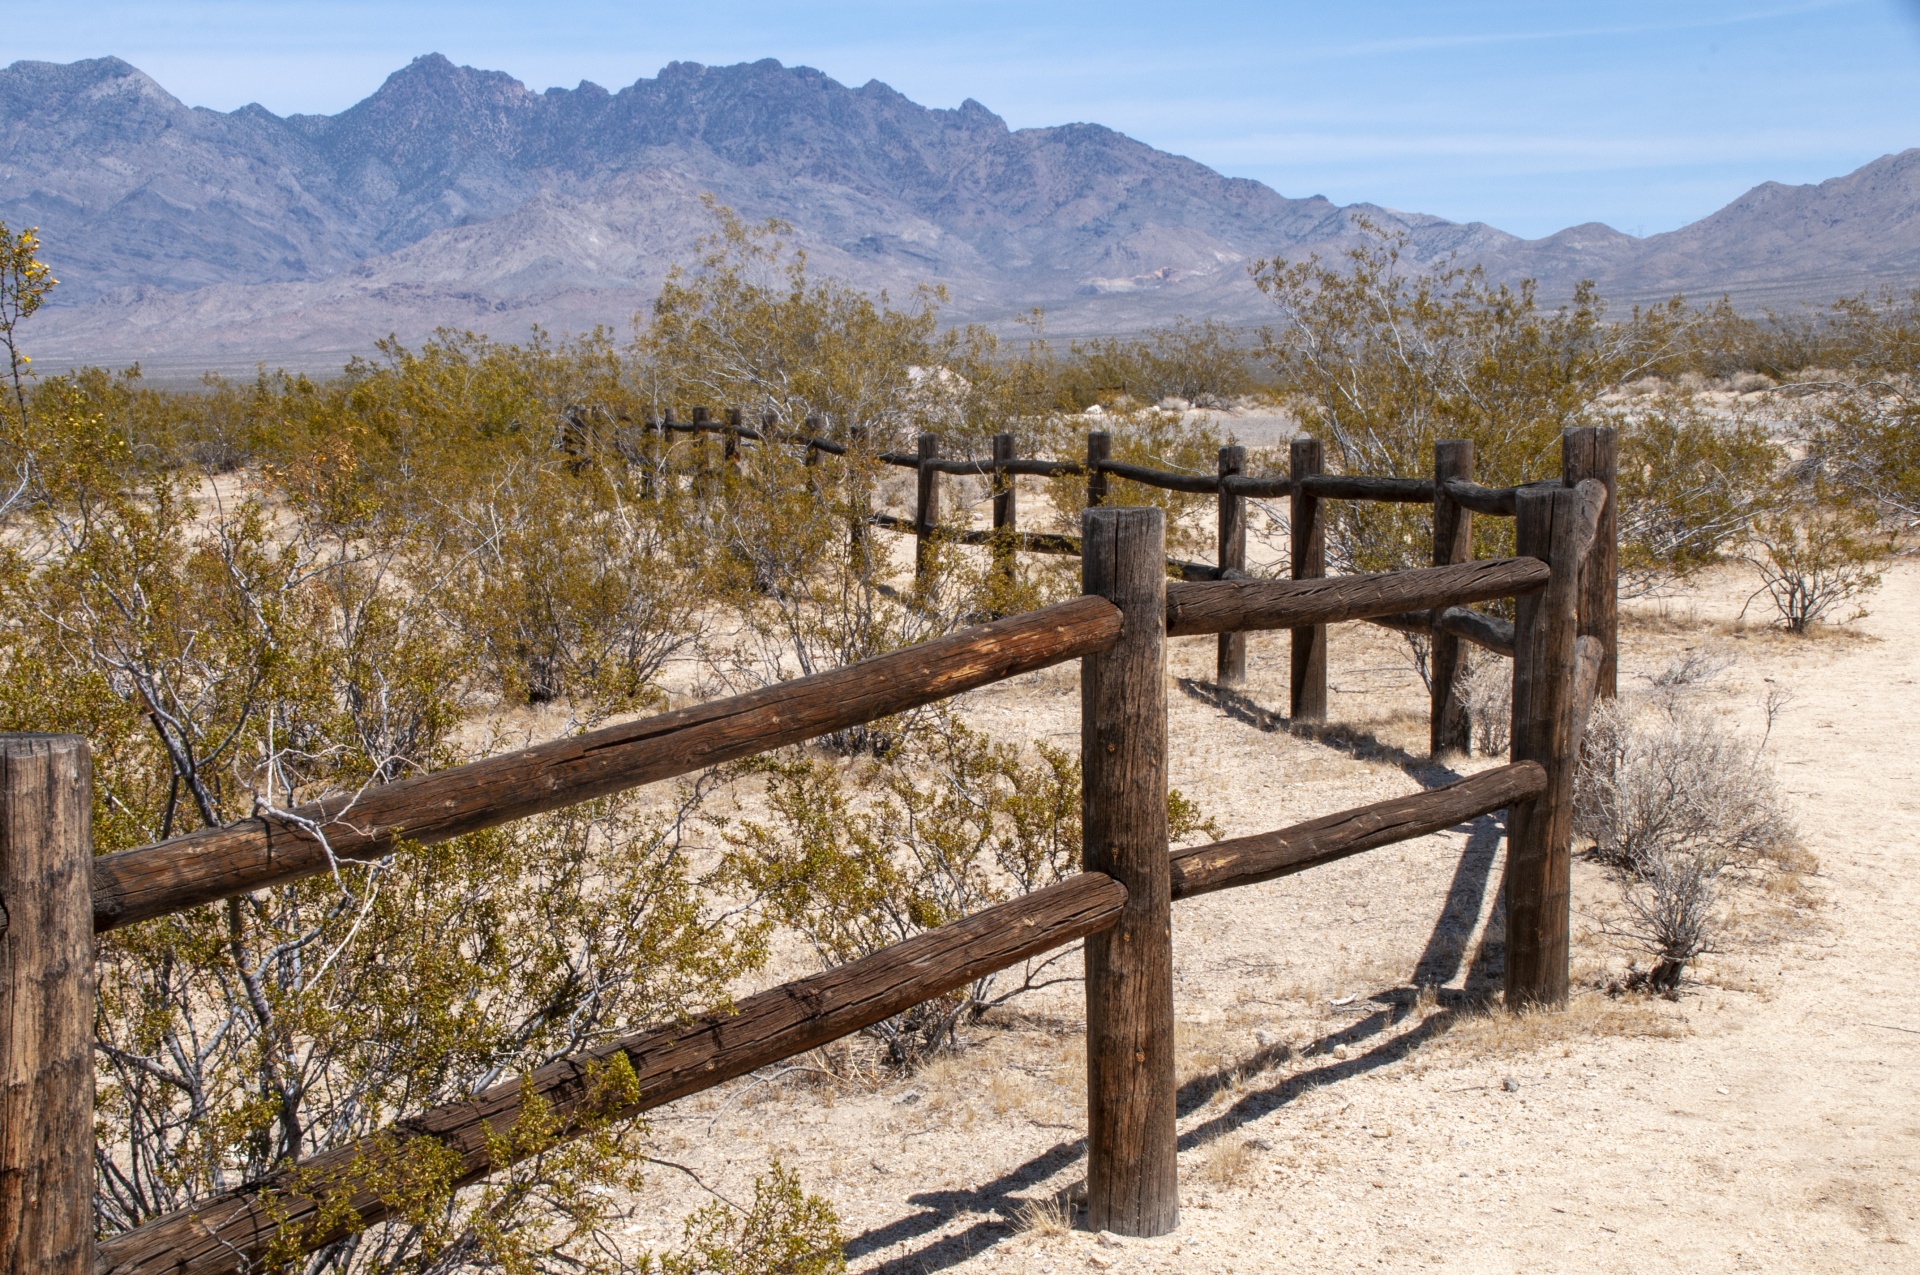 A wooden fence in desert with brush all around it